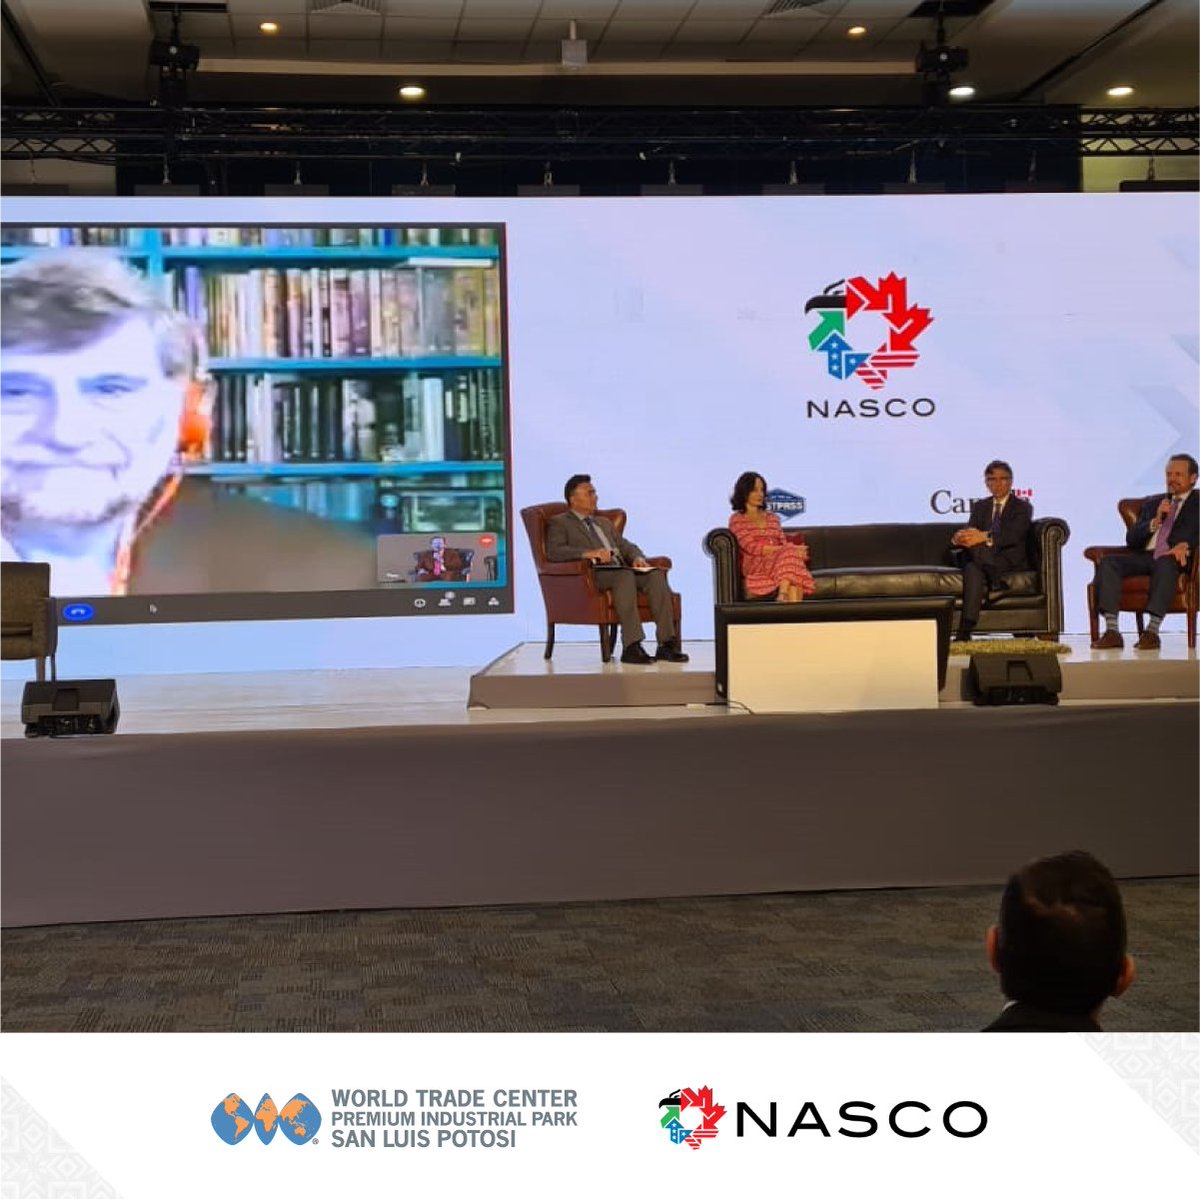 The Trilateral Forum @NASCONetwork 2021 has started. In the opening panel we were honored with the Governor of @GobEdoSLP @JMCarrerasGob and Celeste Rebora, executive of the Valoran Group.
#NASCO2021 #TMEC #JoinUs